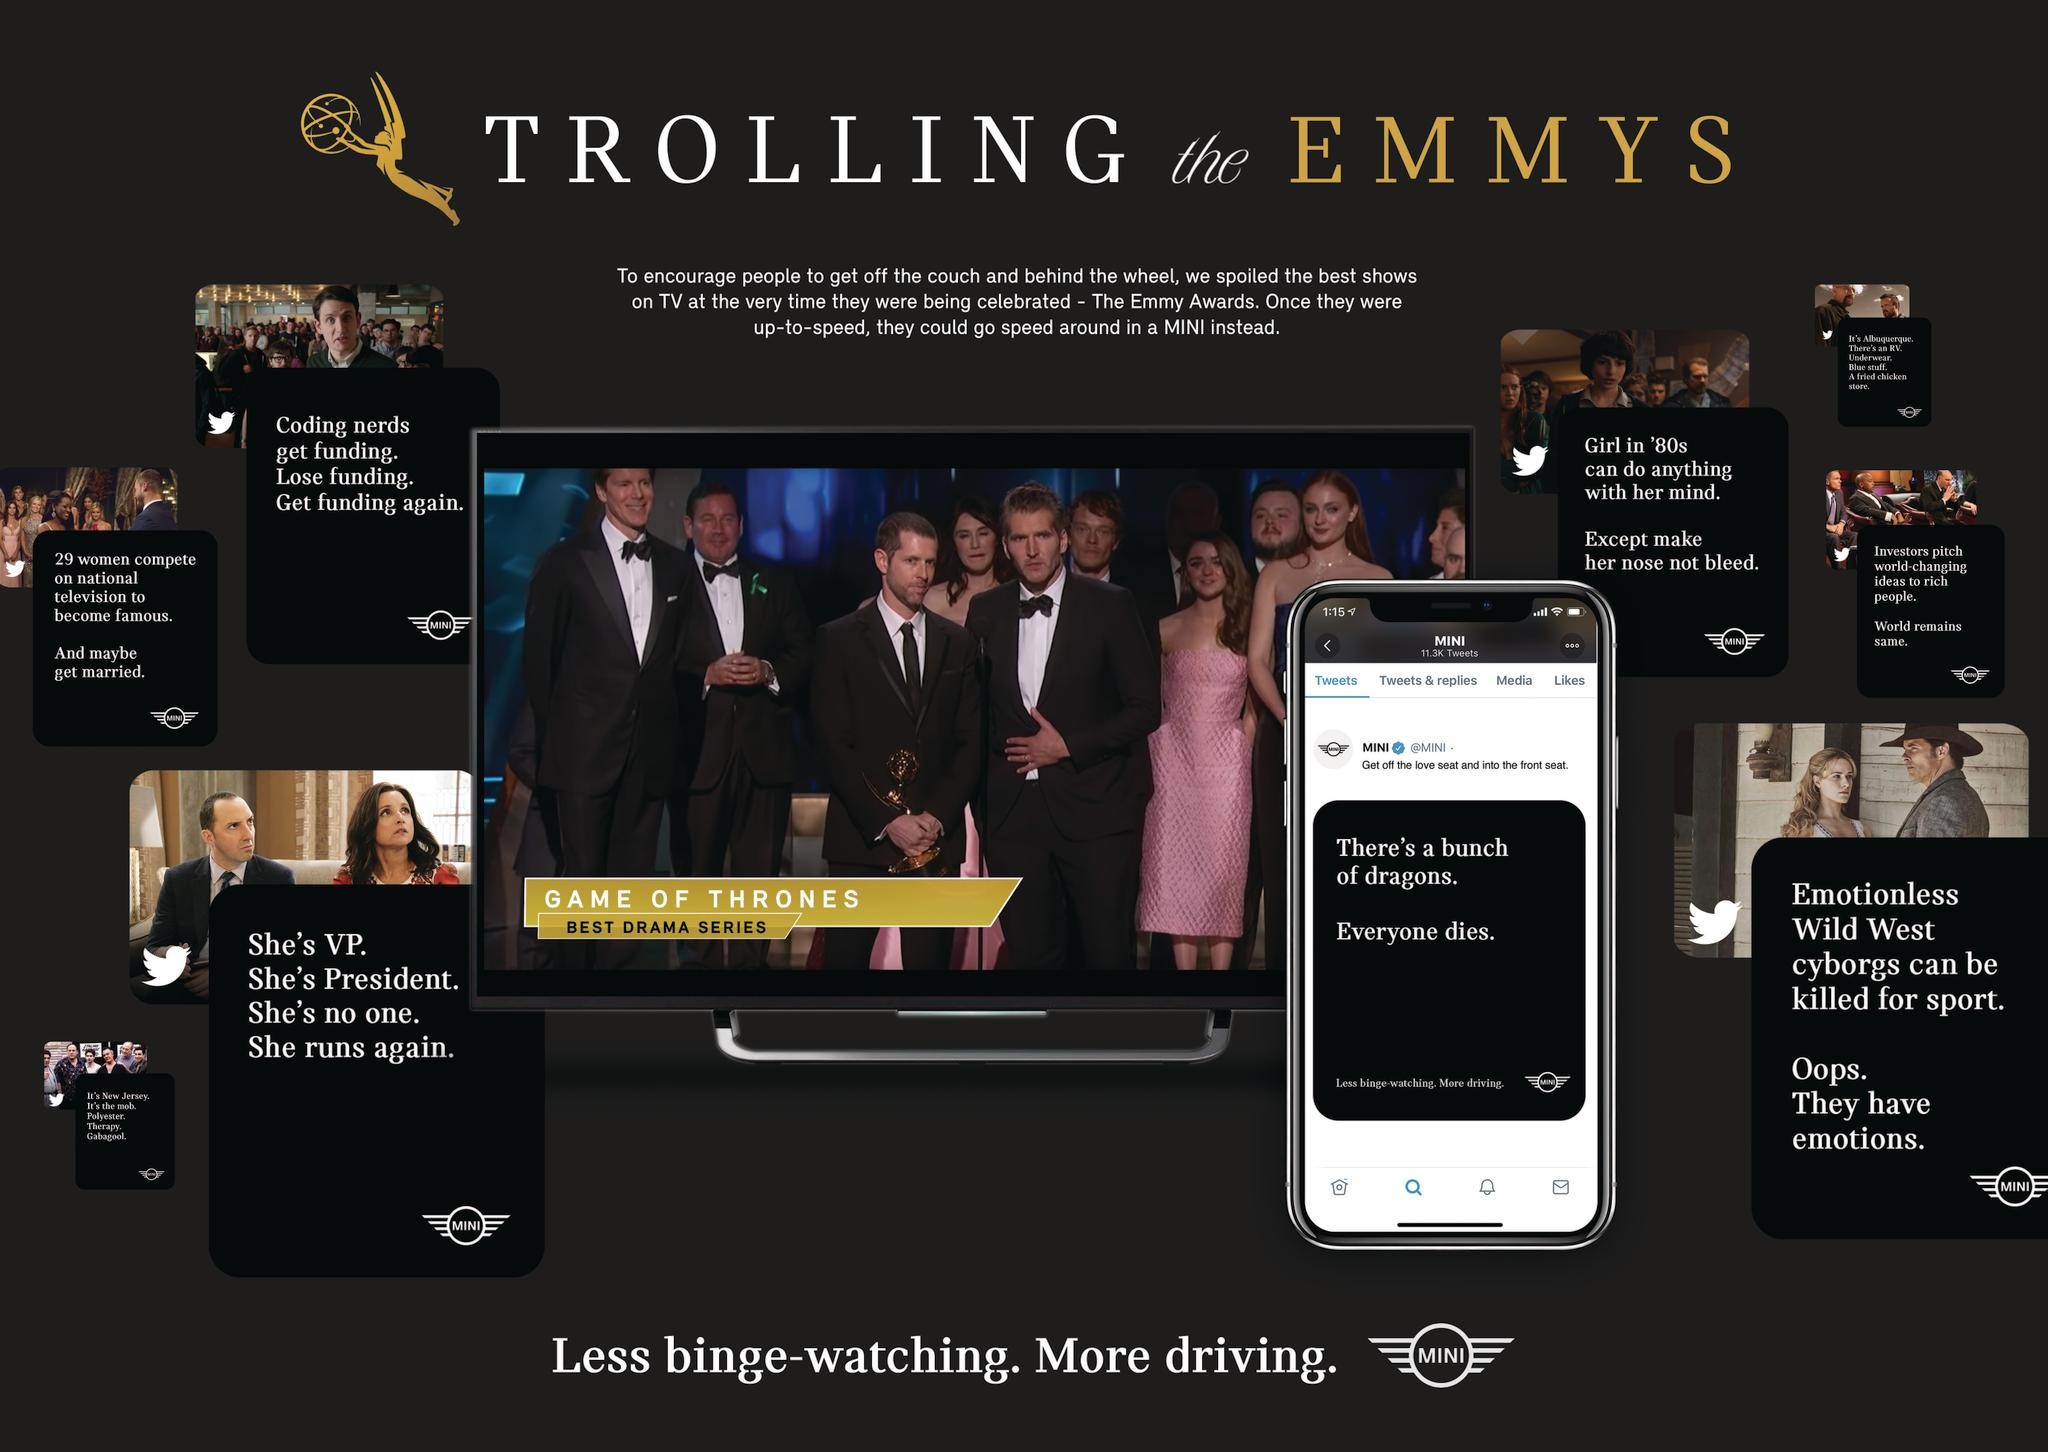 Trolling the Emmy's